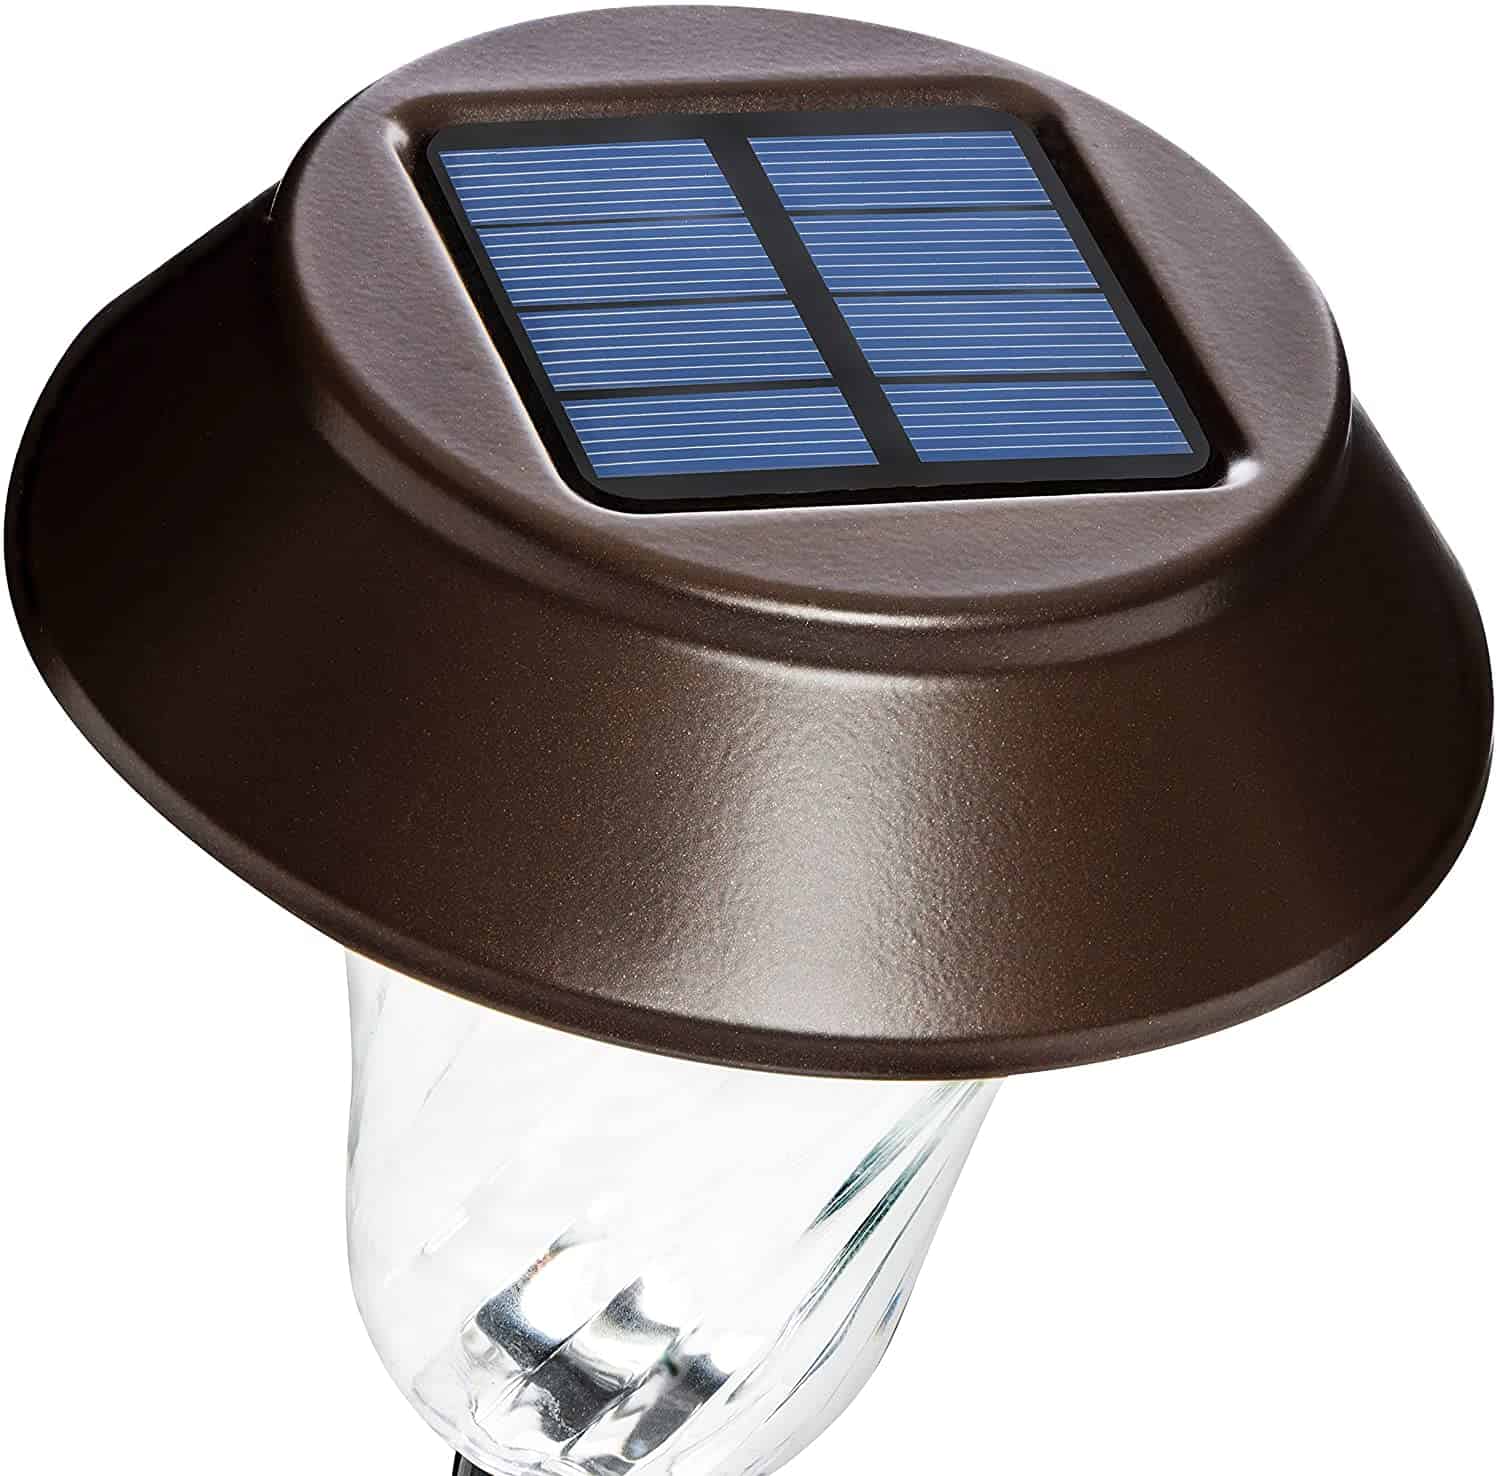 Enchated spaces bronze solar path lights